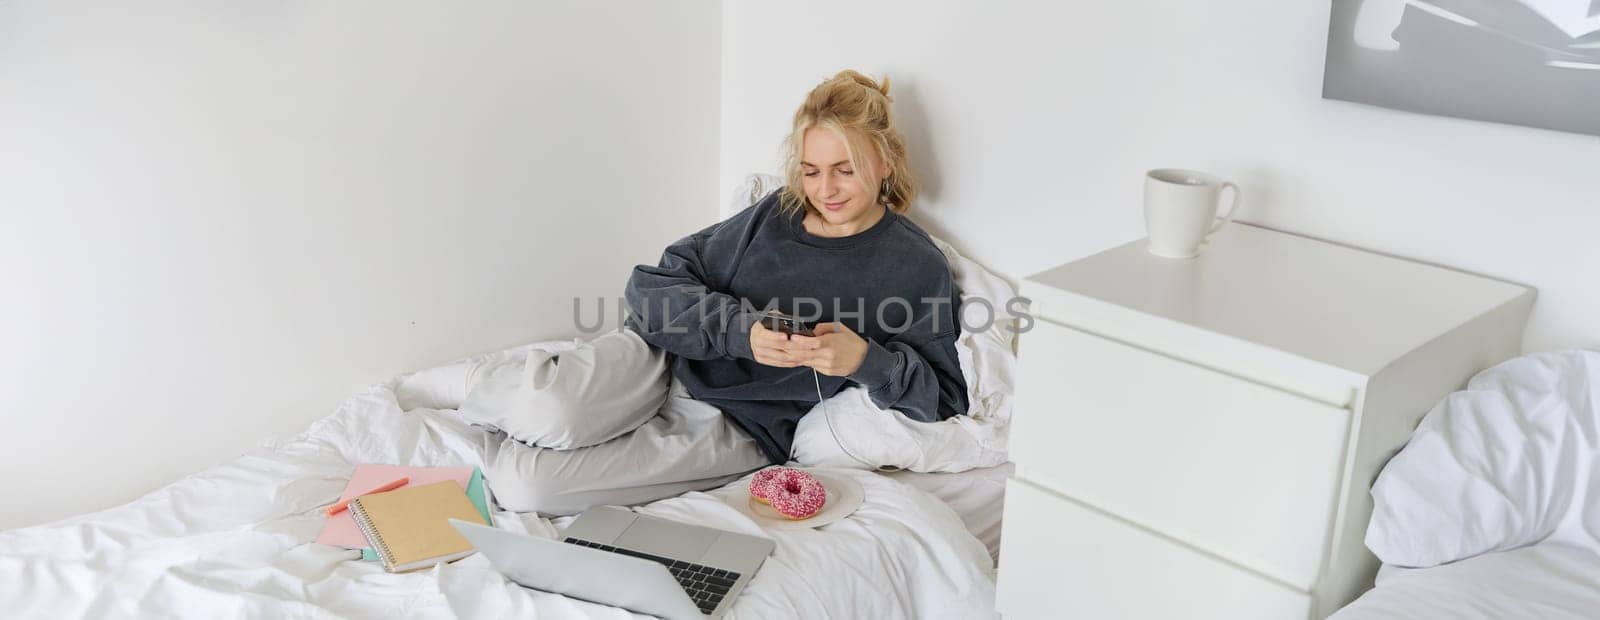 Portrait of smiling candid woman, lying in bed with doughnut, using smartphone and laptop, resting at home in bedroom, watching tv show or chatting online.